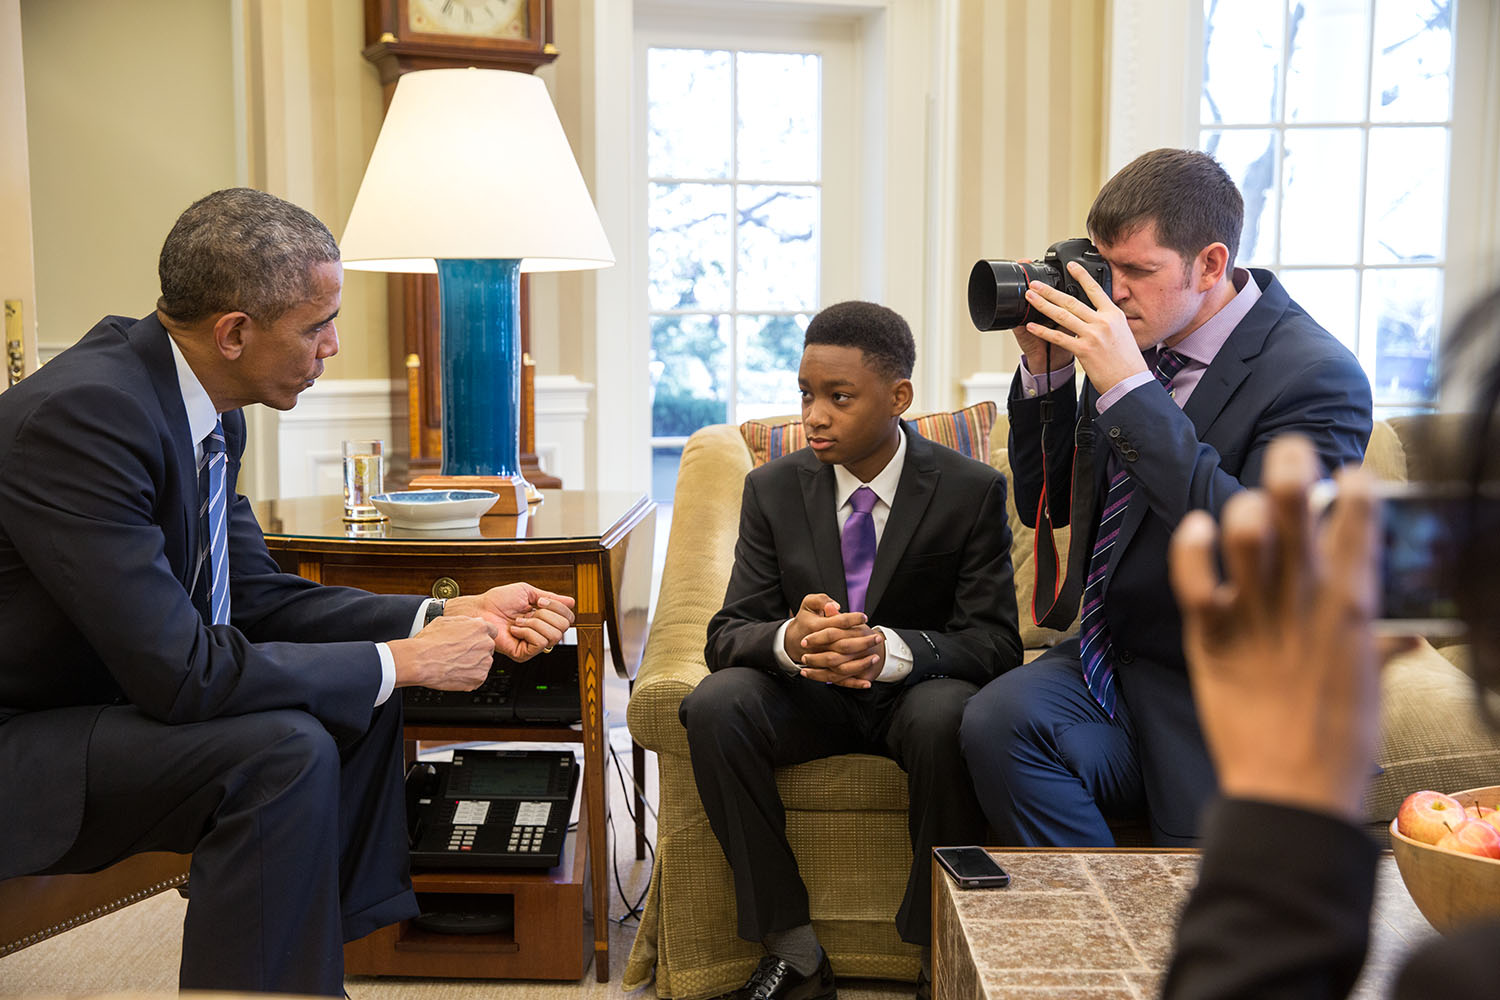 President Obama meets Vidal Chastanet and Nadia Lopez for the 